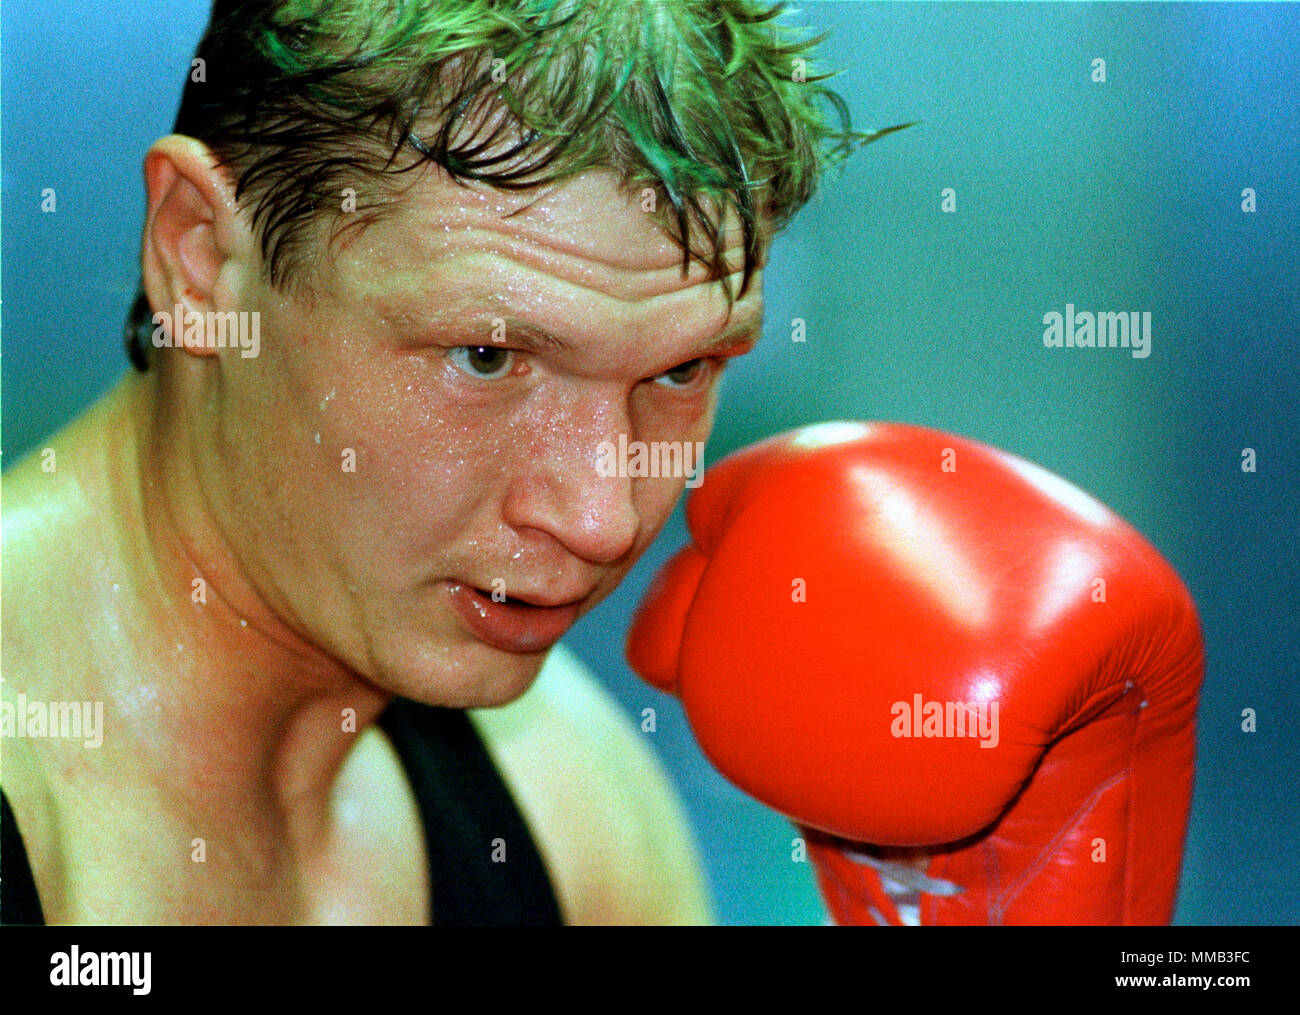 Boxing: portrait of professional boxer  Torsten MAY, Germany, June 1998 Stock Photo